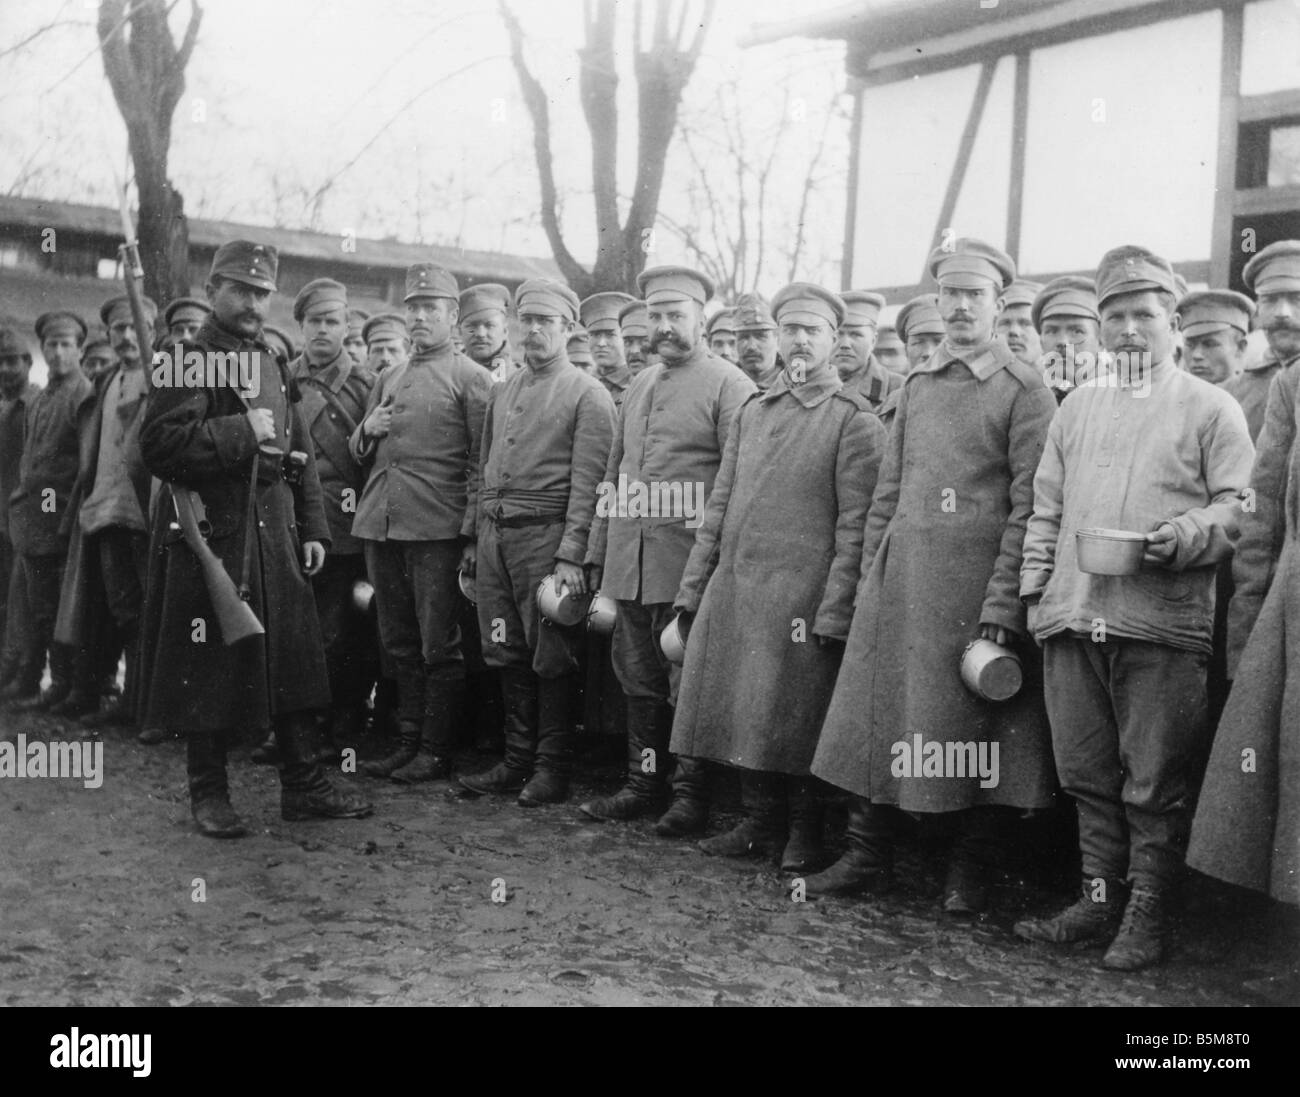 2 G55 K1 1916 2 Austrian soldier POWs WWI 1916 History World War I Prisoners of war A soldier of the imperial and royal Austrian Stock Photo